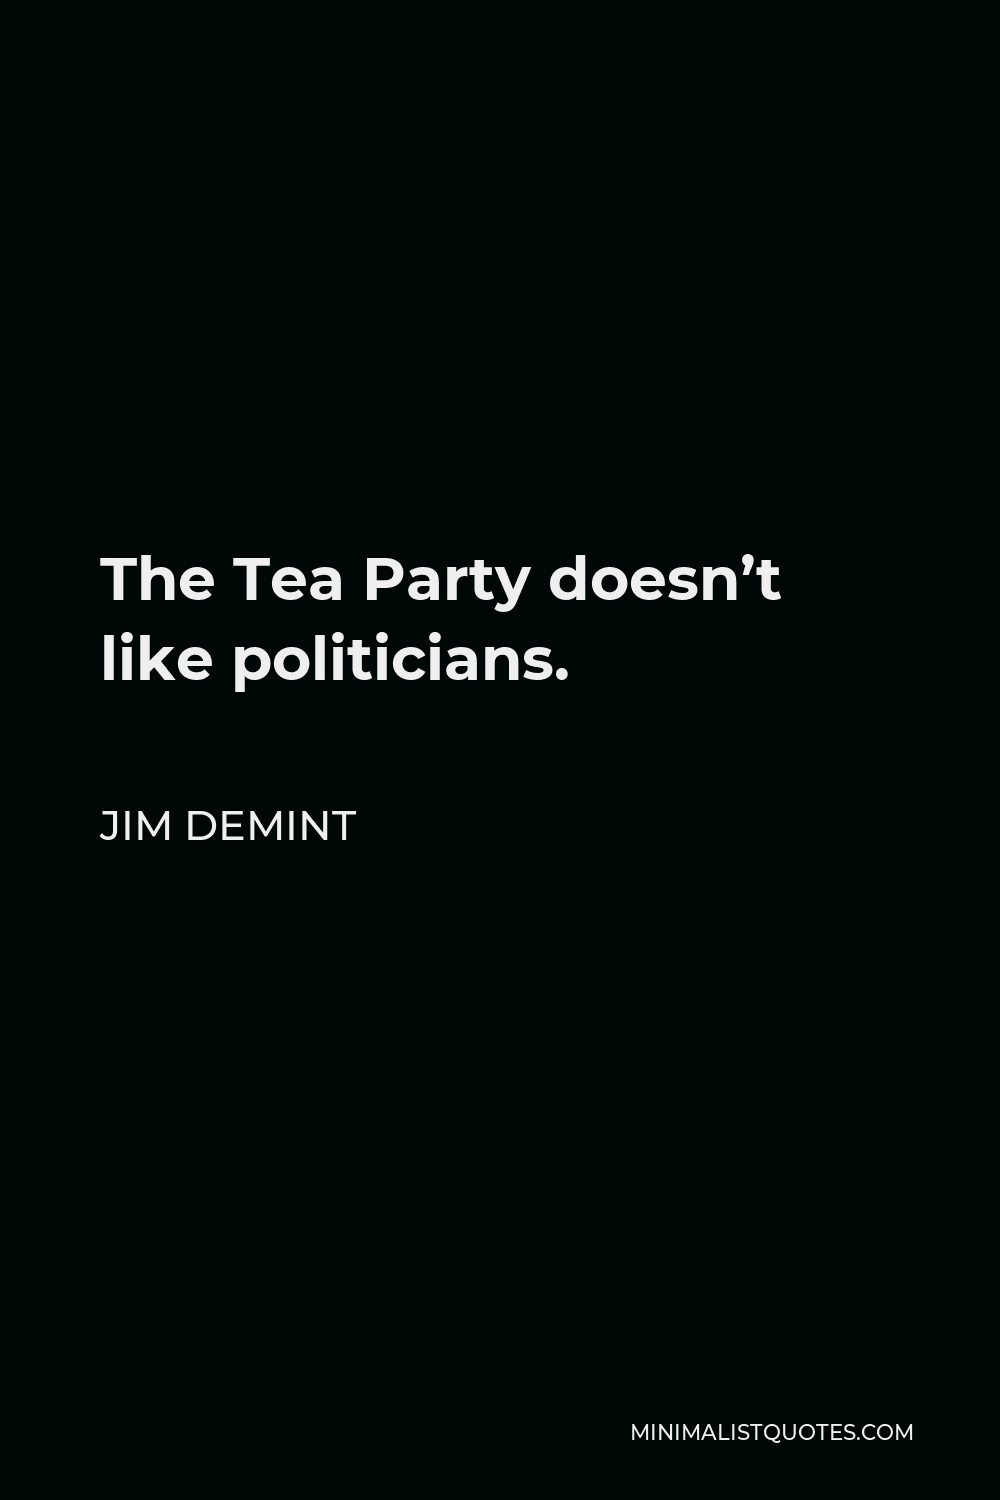 Jim Demint Quote The Tea Party Doesnt Like Politicians 9956